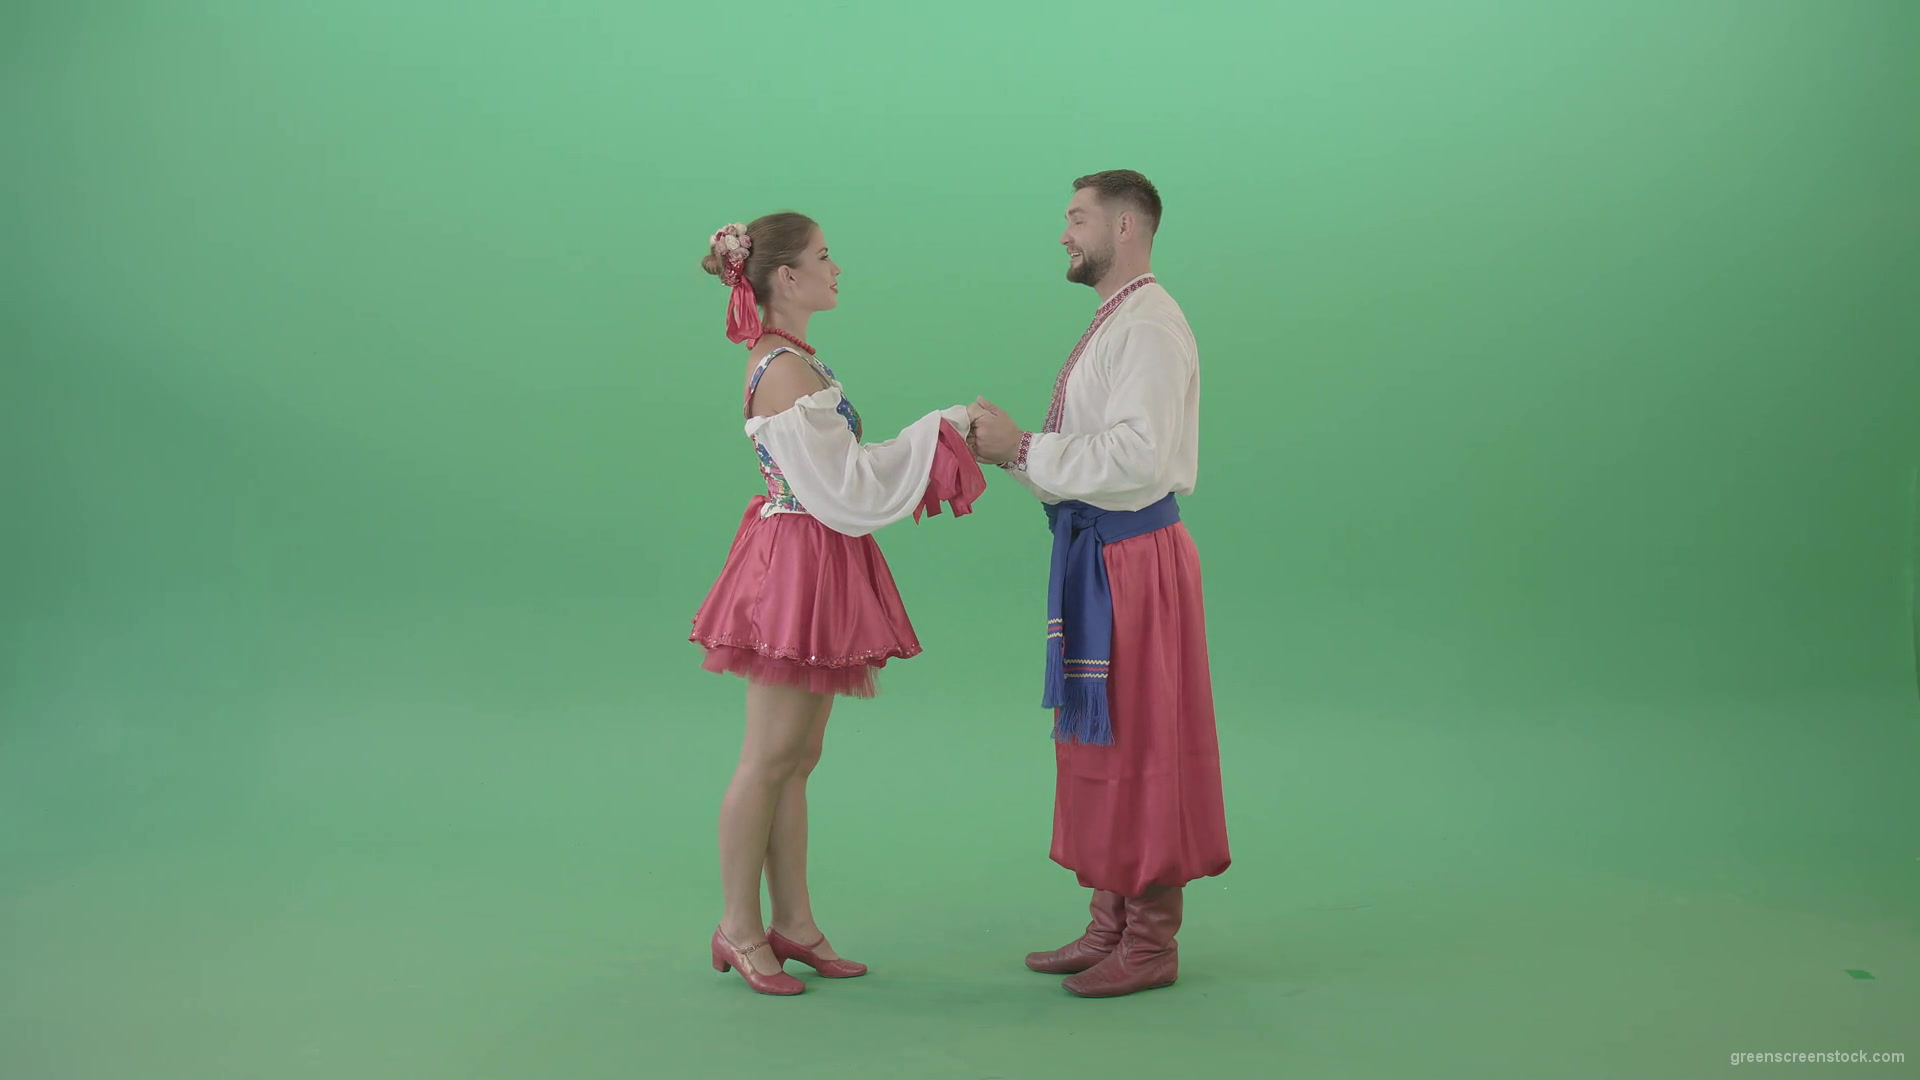 Beautiful-Ukrainian-couple-speaking-about-love-in-ethno-costumes-isolated-on-green-screen-4K-Video-Footage-1920_004 Green Screen Stock